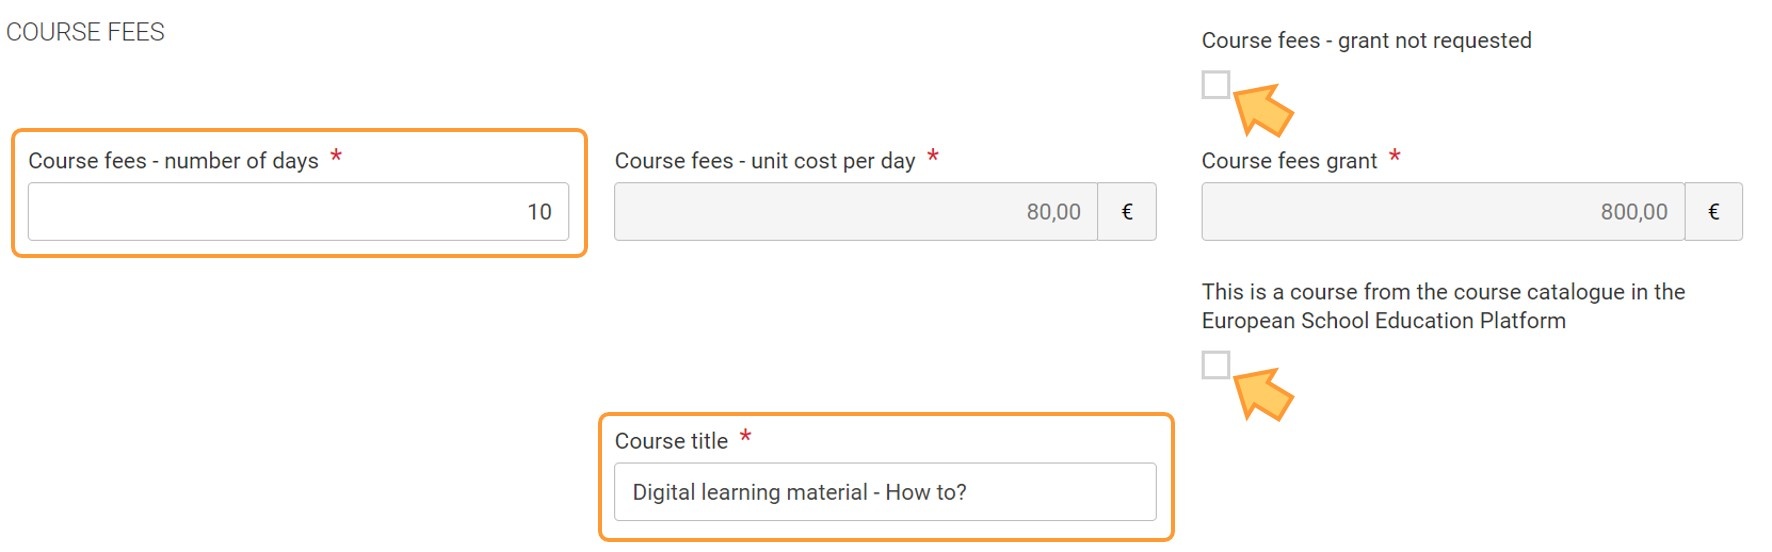 Example of Course fees grant